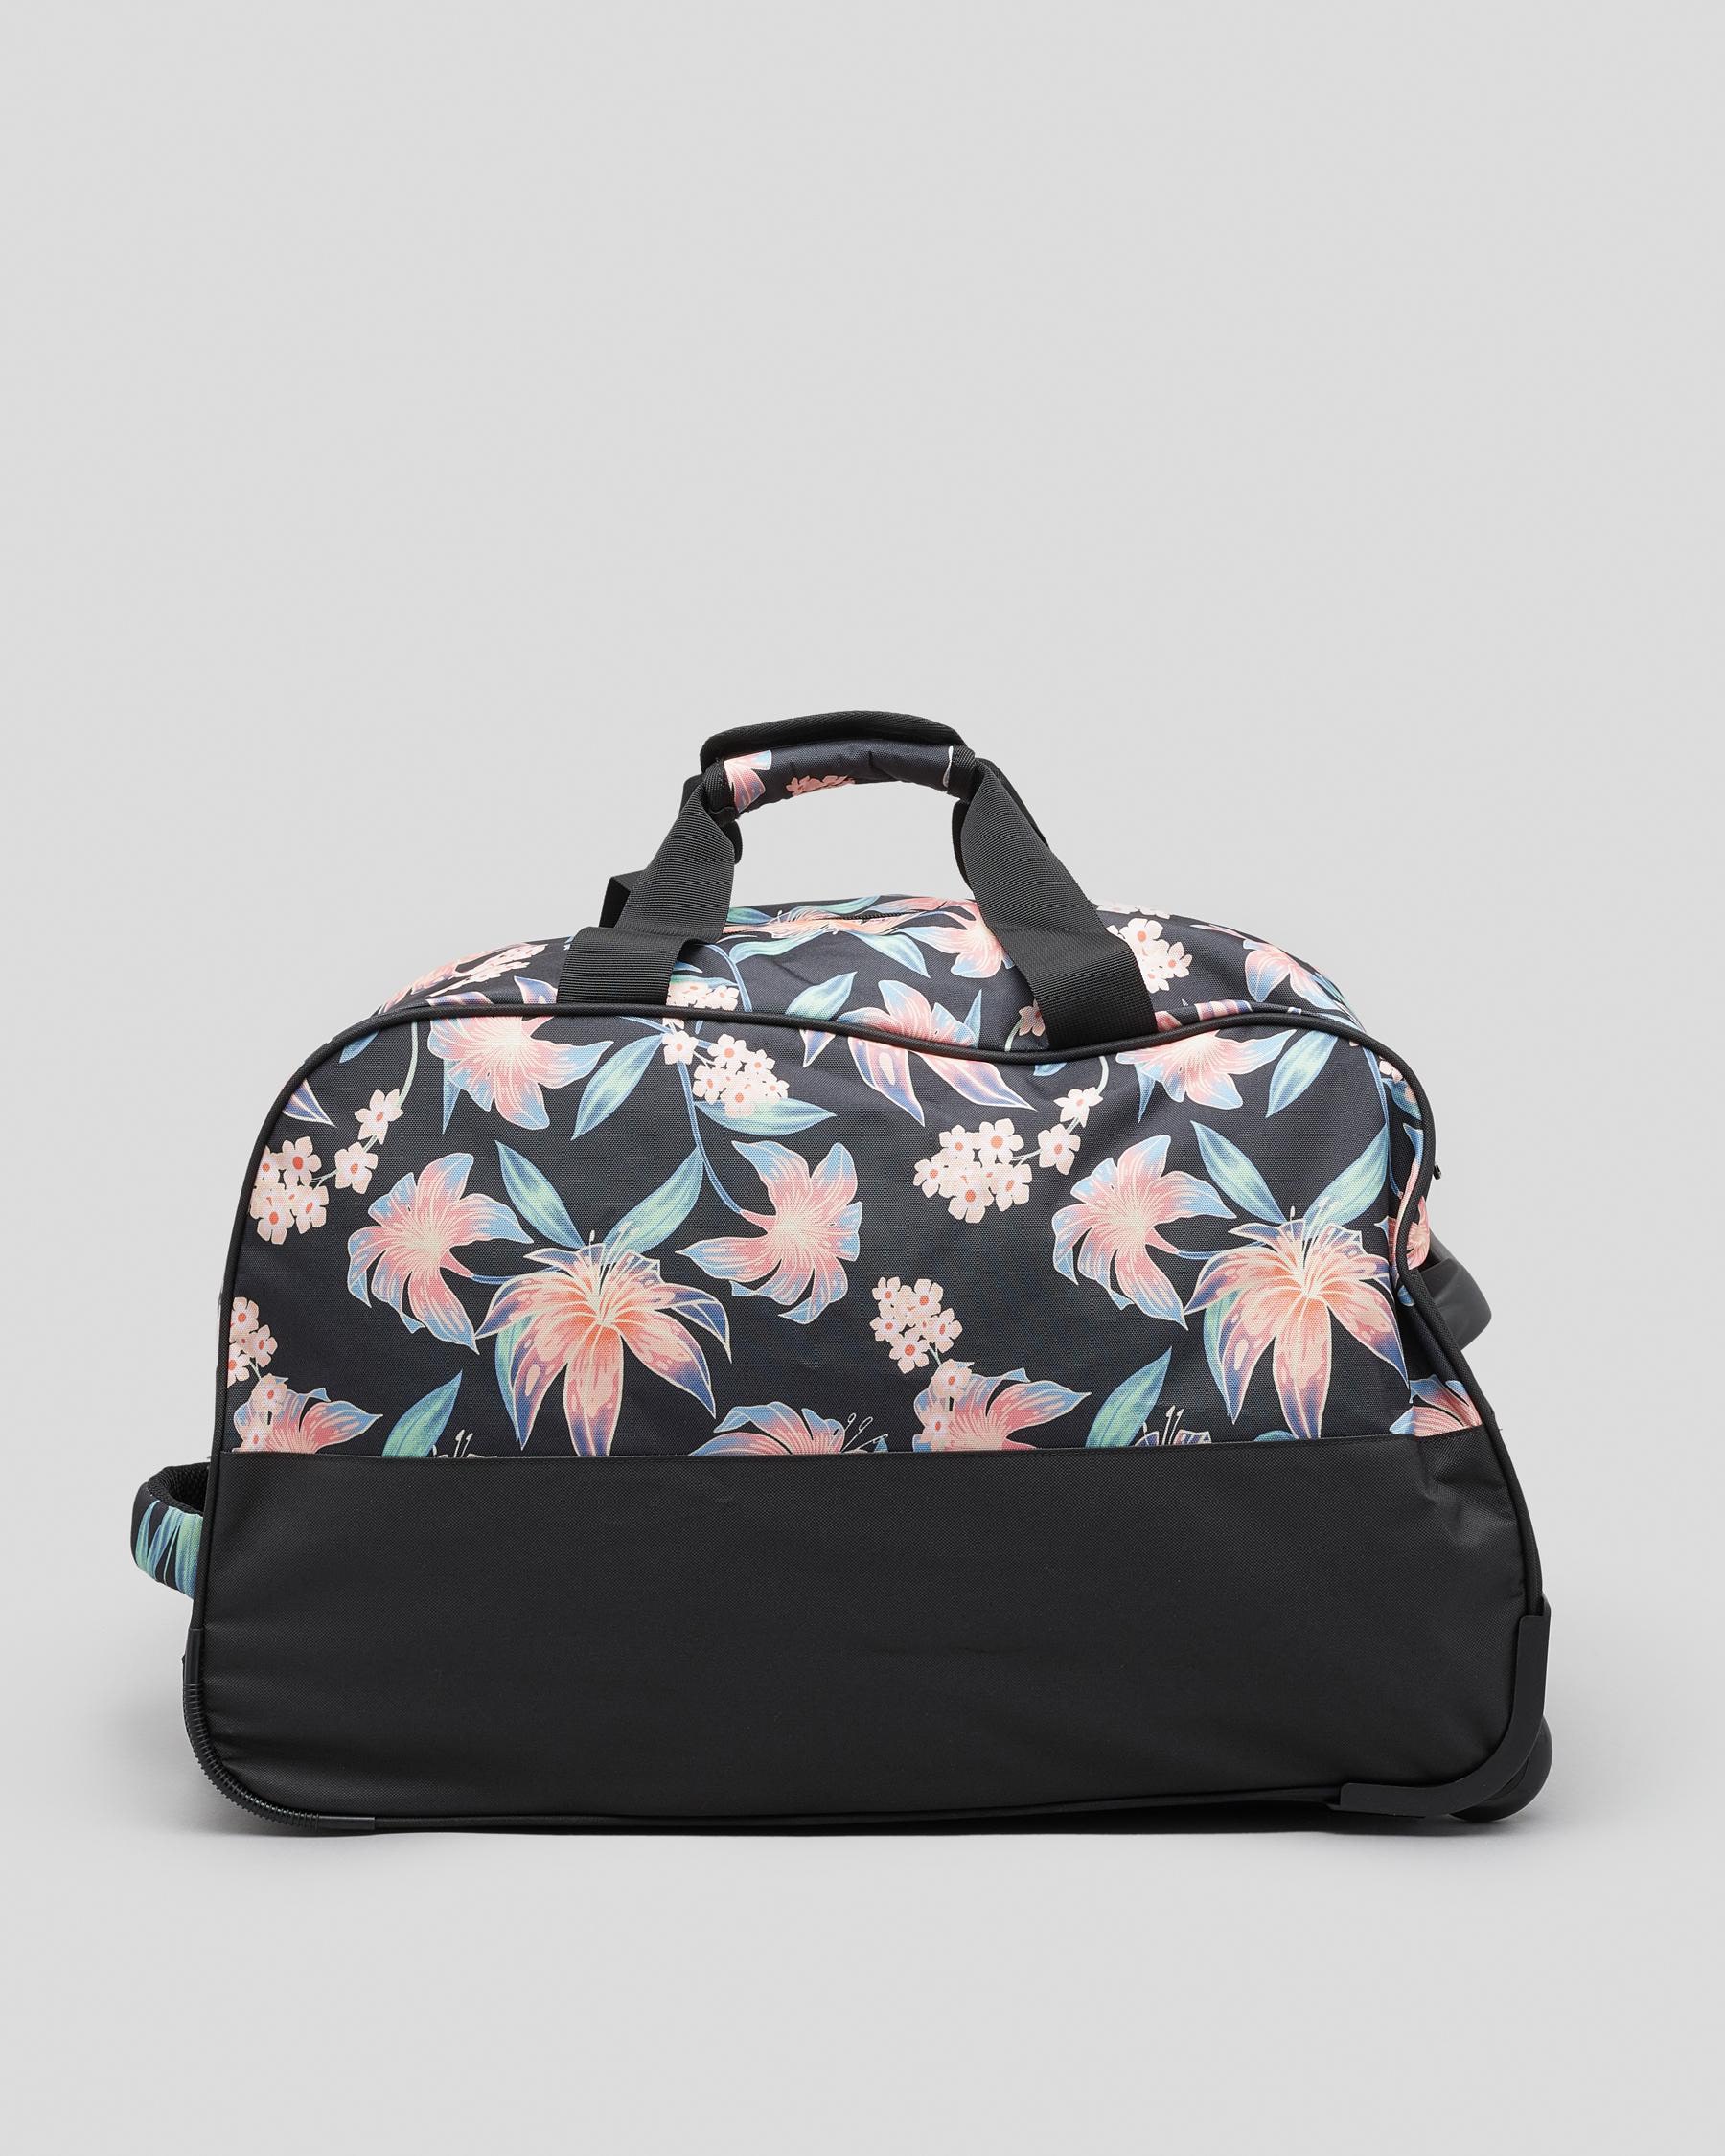 roxy travel bag for sale